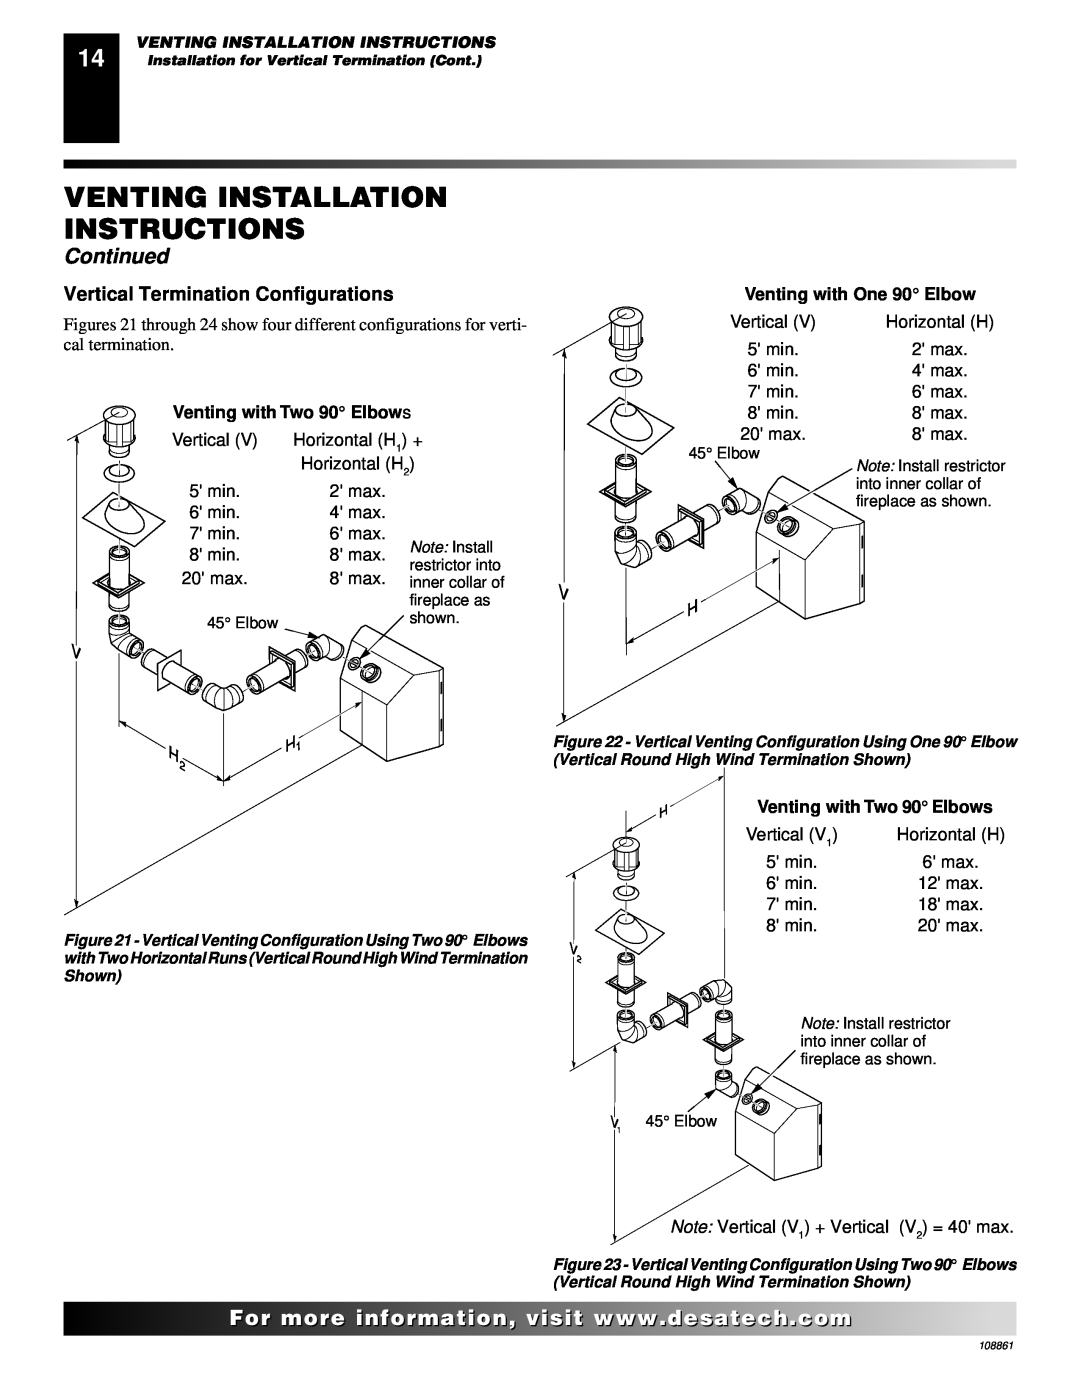 Desa CHDV47PR Vertical Termination Configurations, Venting Installation Instructions, Continued, Venting with One 90 Elbow 